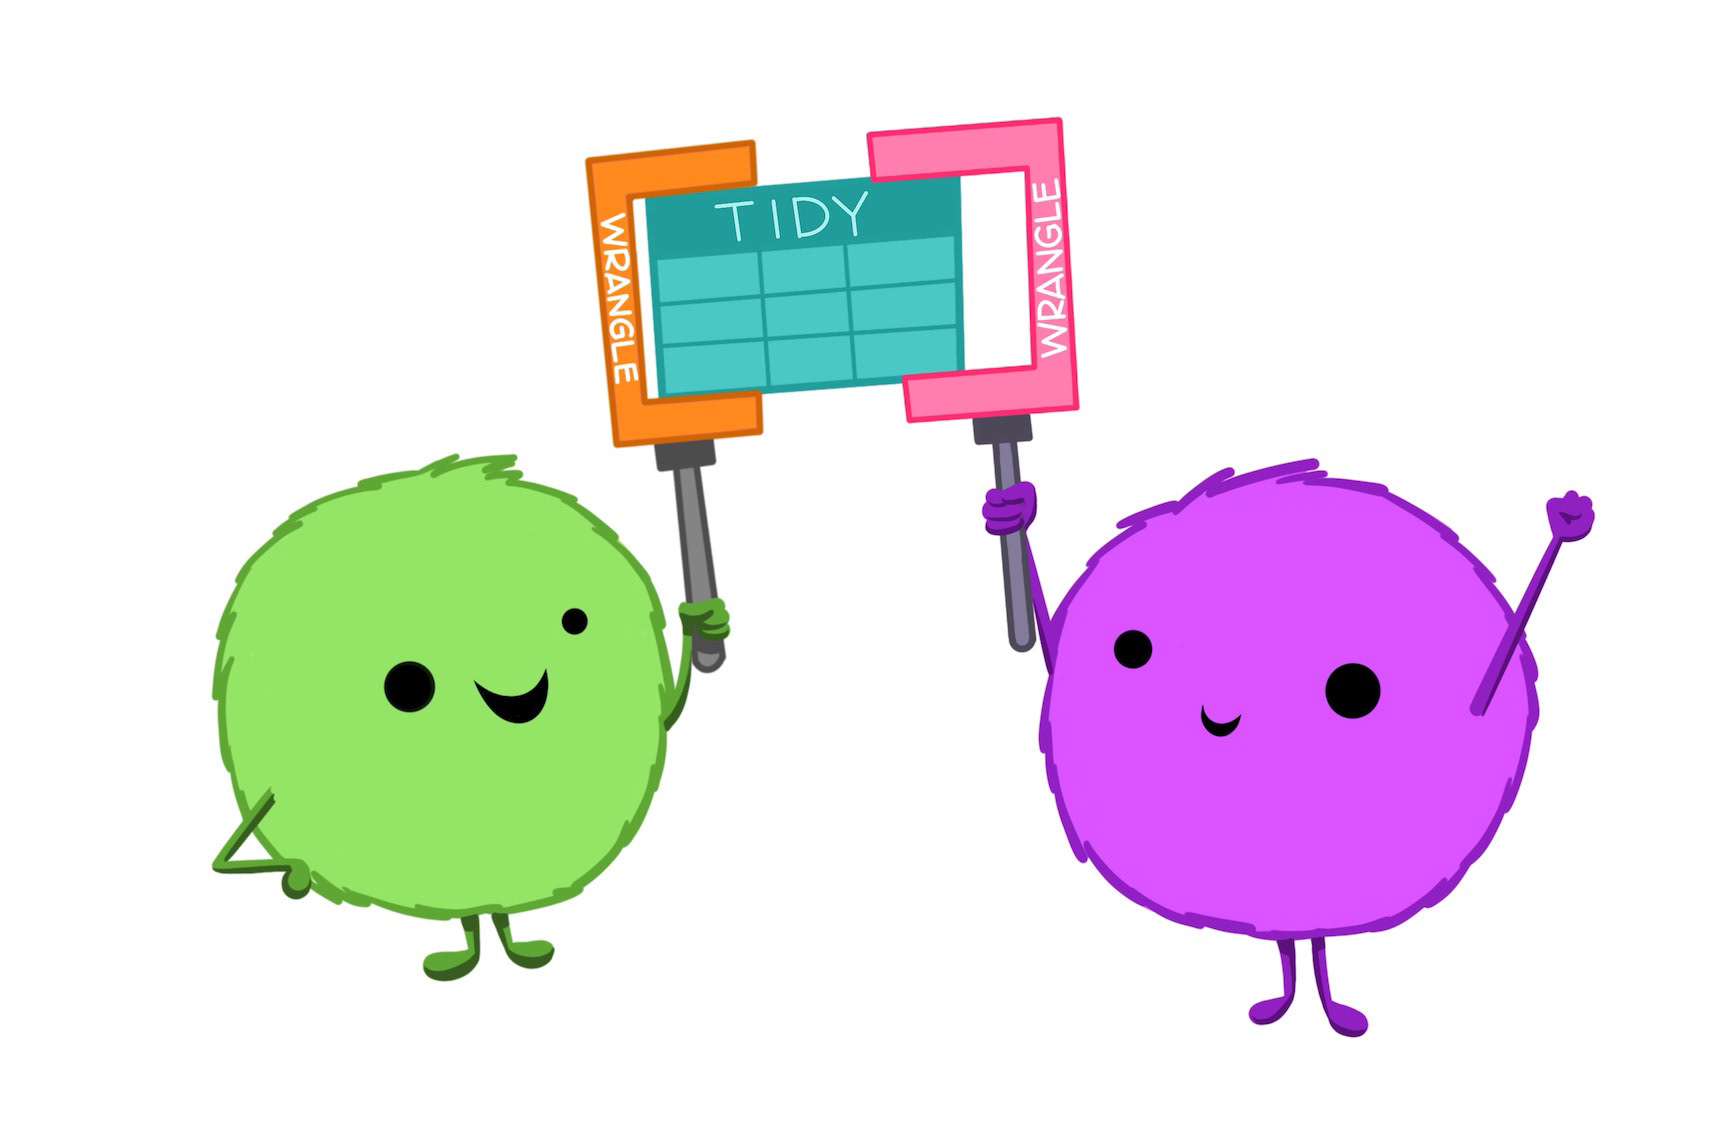 Two happy looking round fuzzy monsters, each holding a similarly shaped wrench with the word “wrangle” on it. Between their tools is held up a rectangular data table labelled “TIDY.”